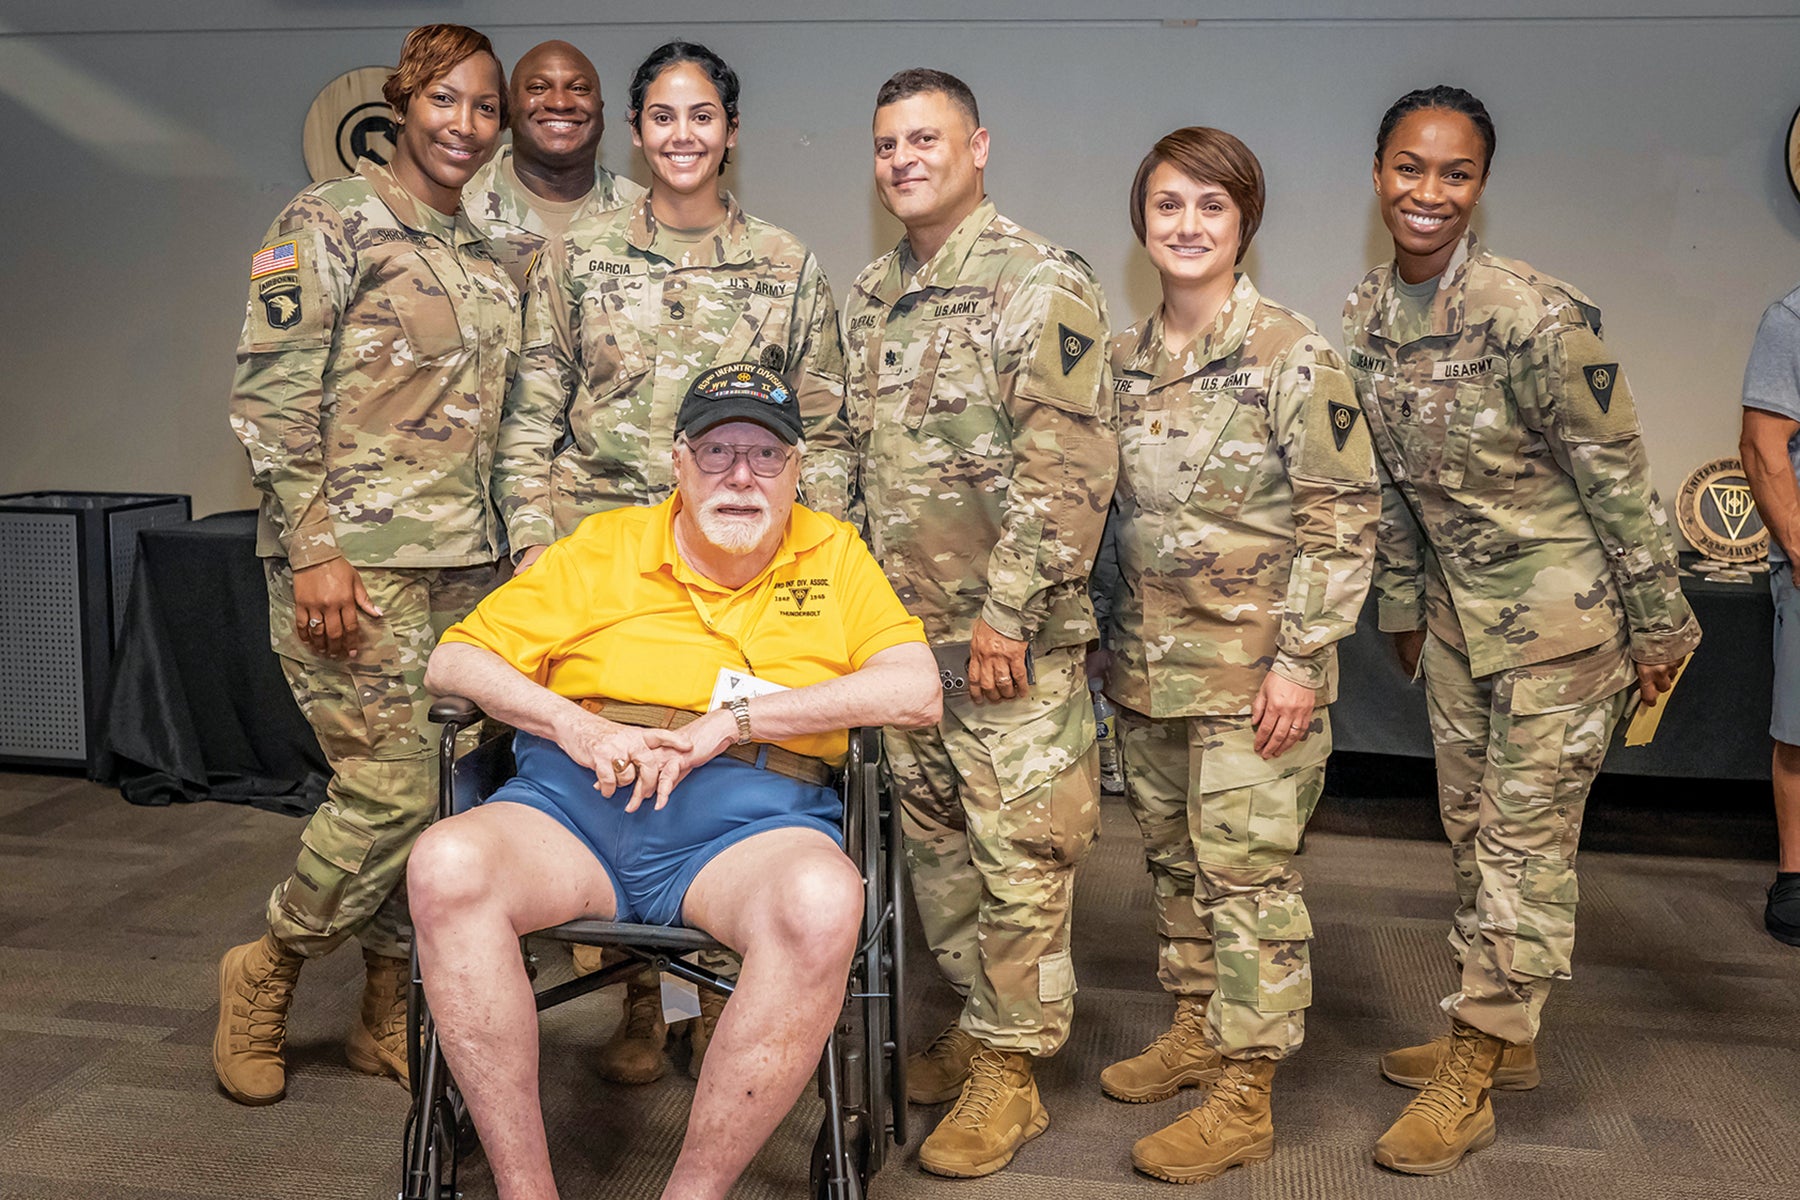 Soldiers pose for a photo with former Pvt. Andre Beaumont, seated, at the museum. (Credit: U.S. Army/Charles Leffler)